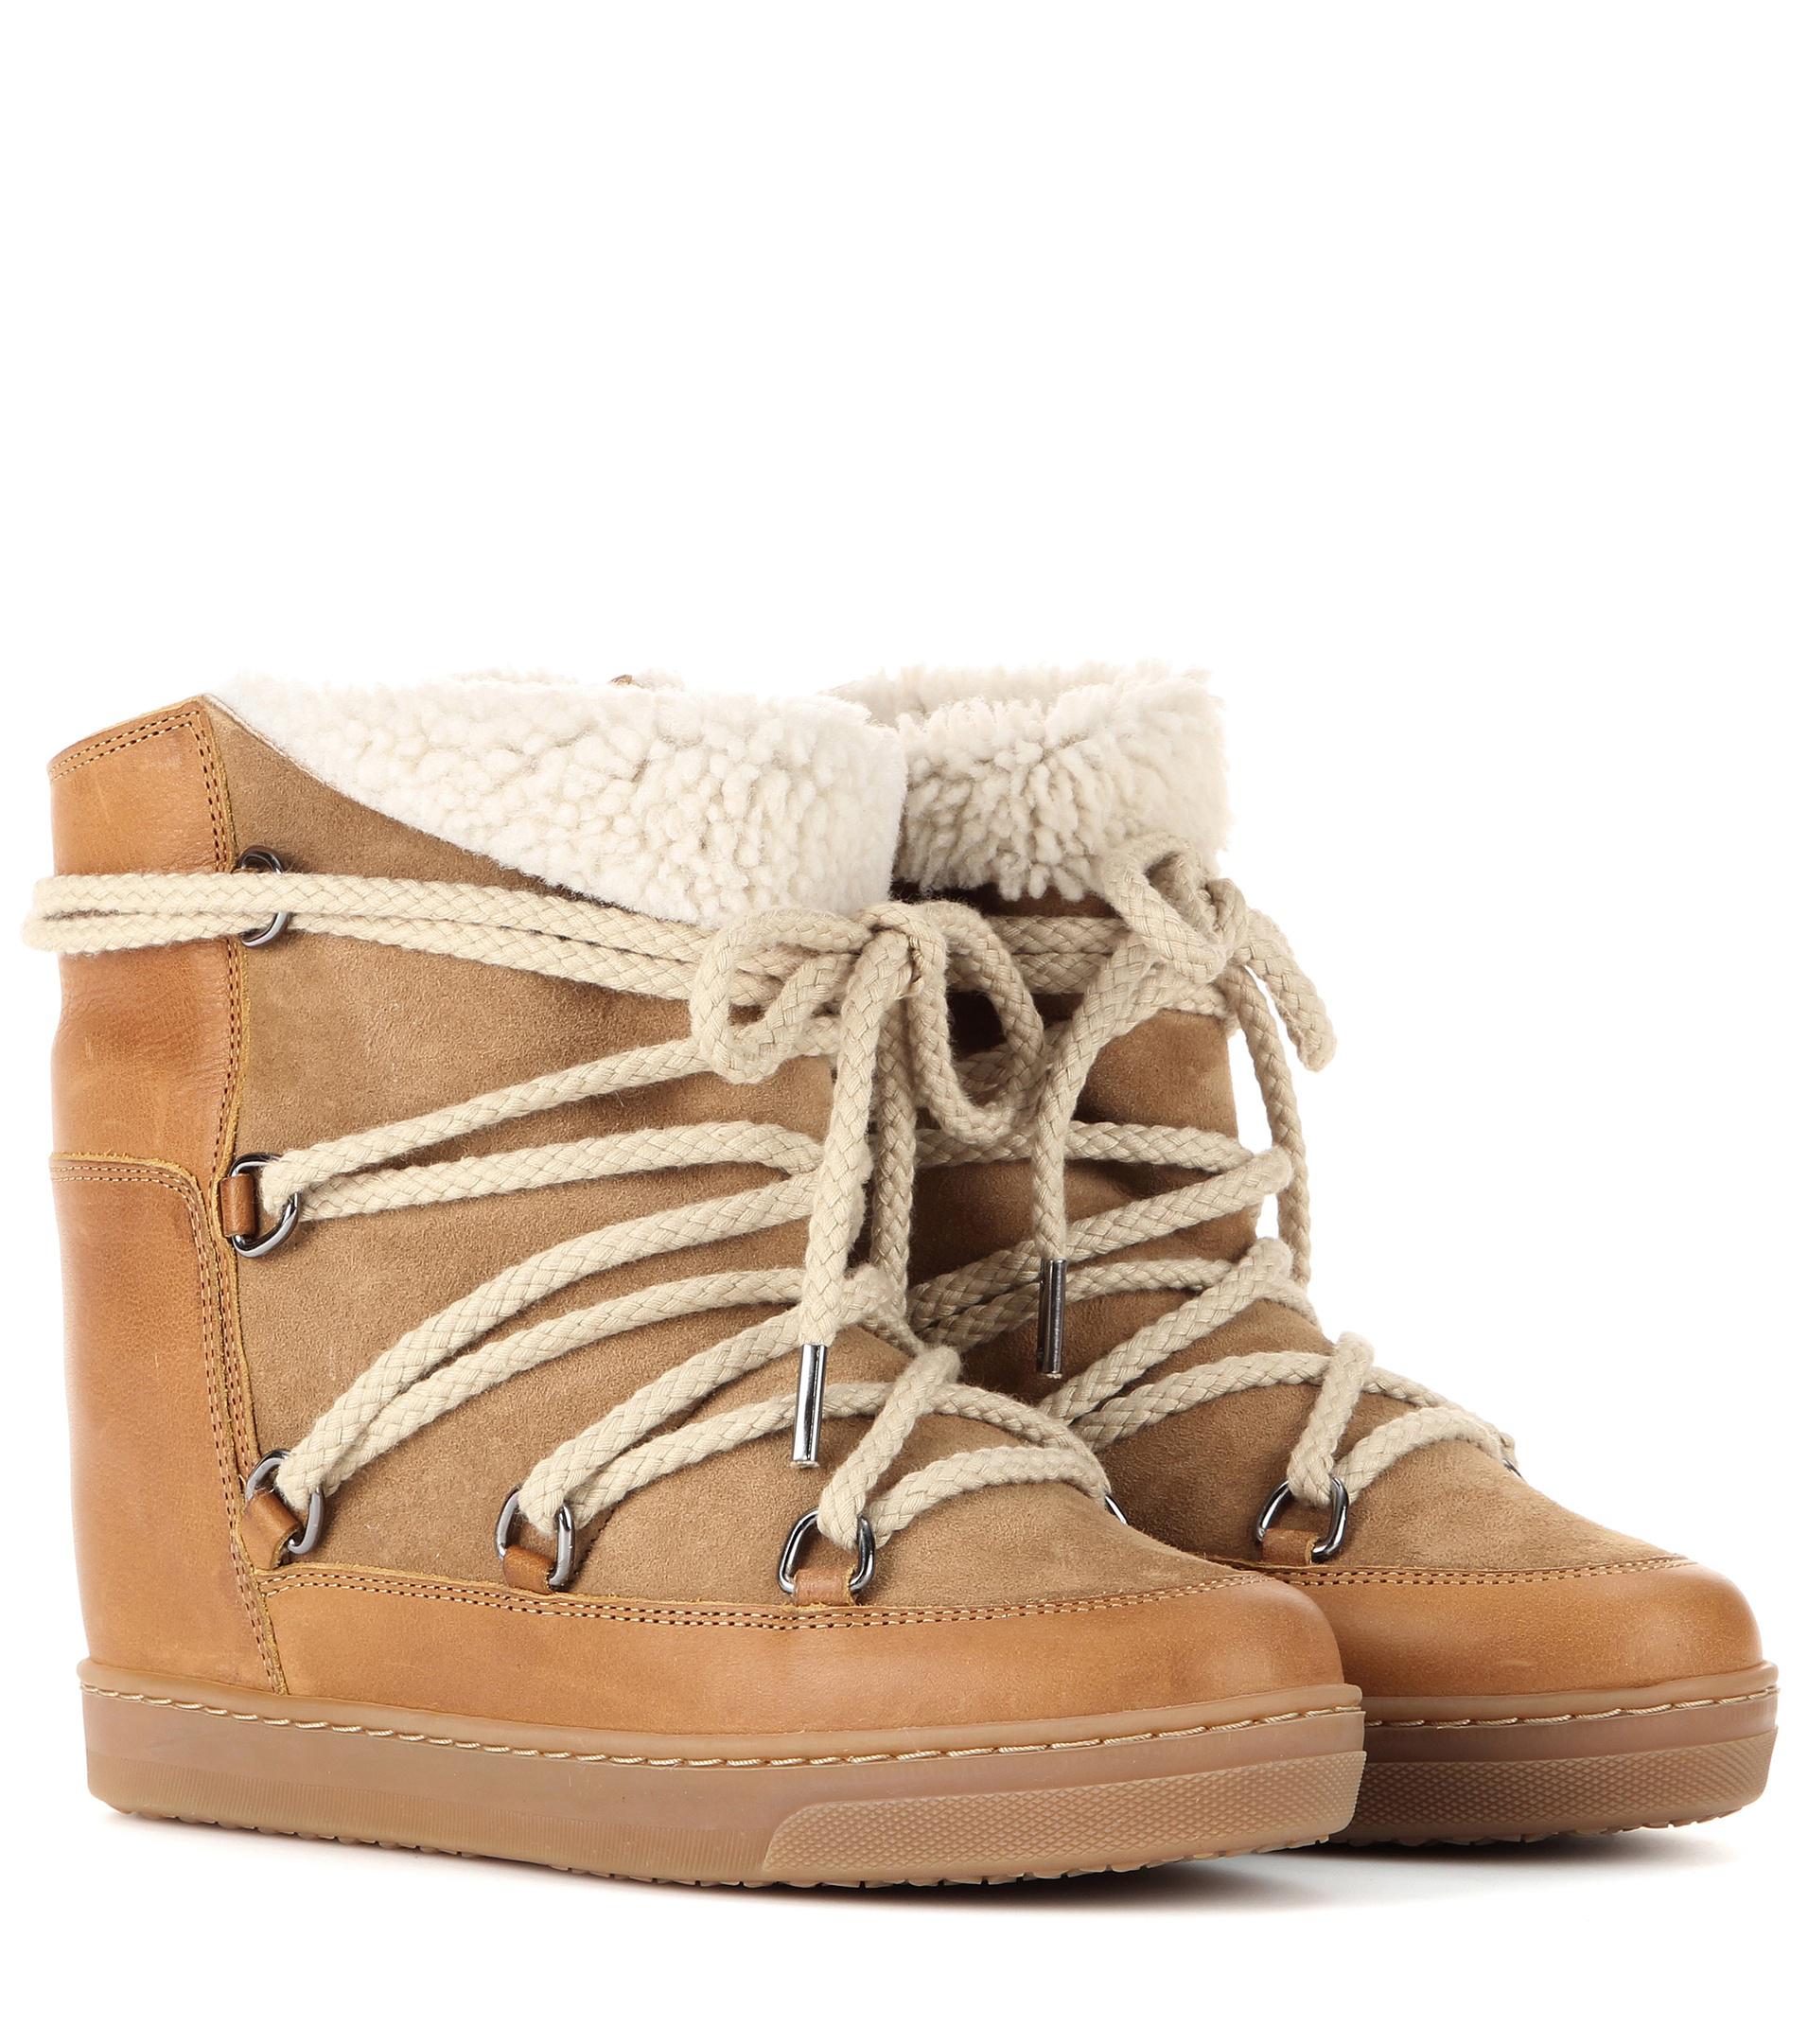 Isabel Marant Nowles Ankle Boots in Beige (Natural) - Lyst